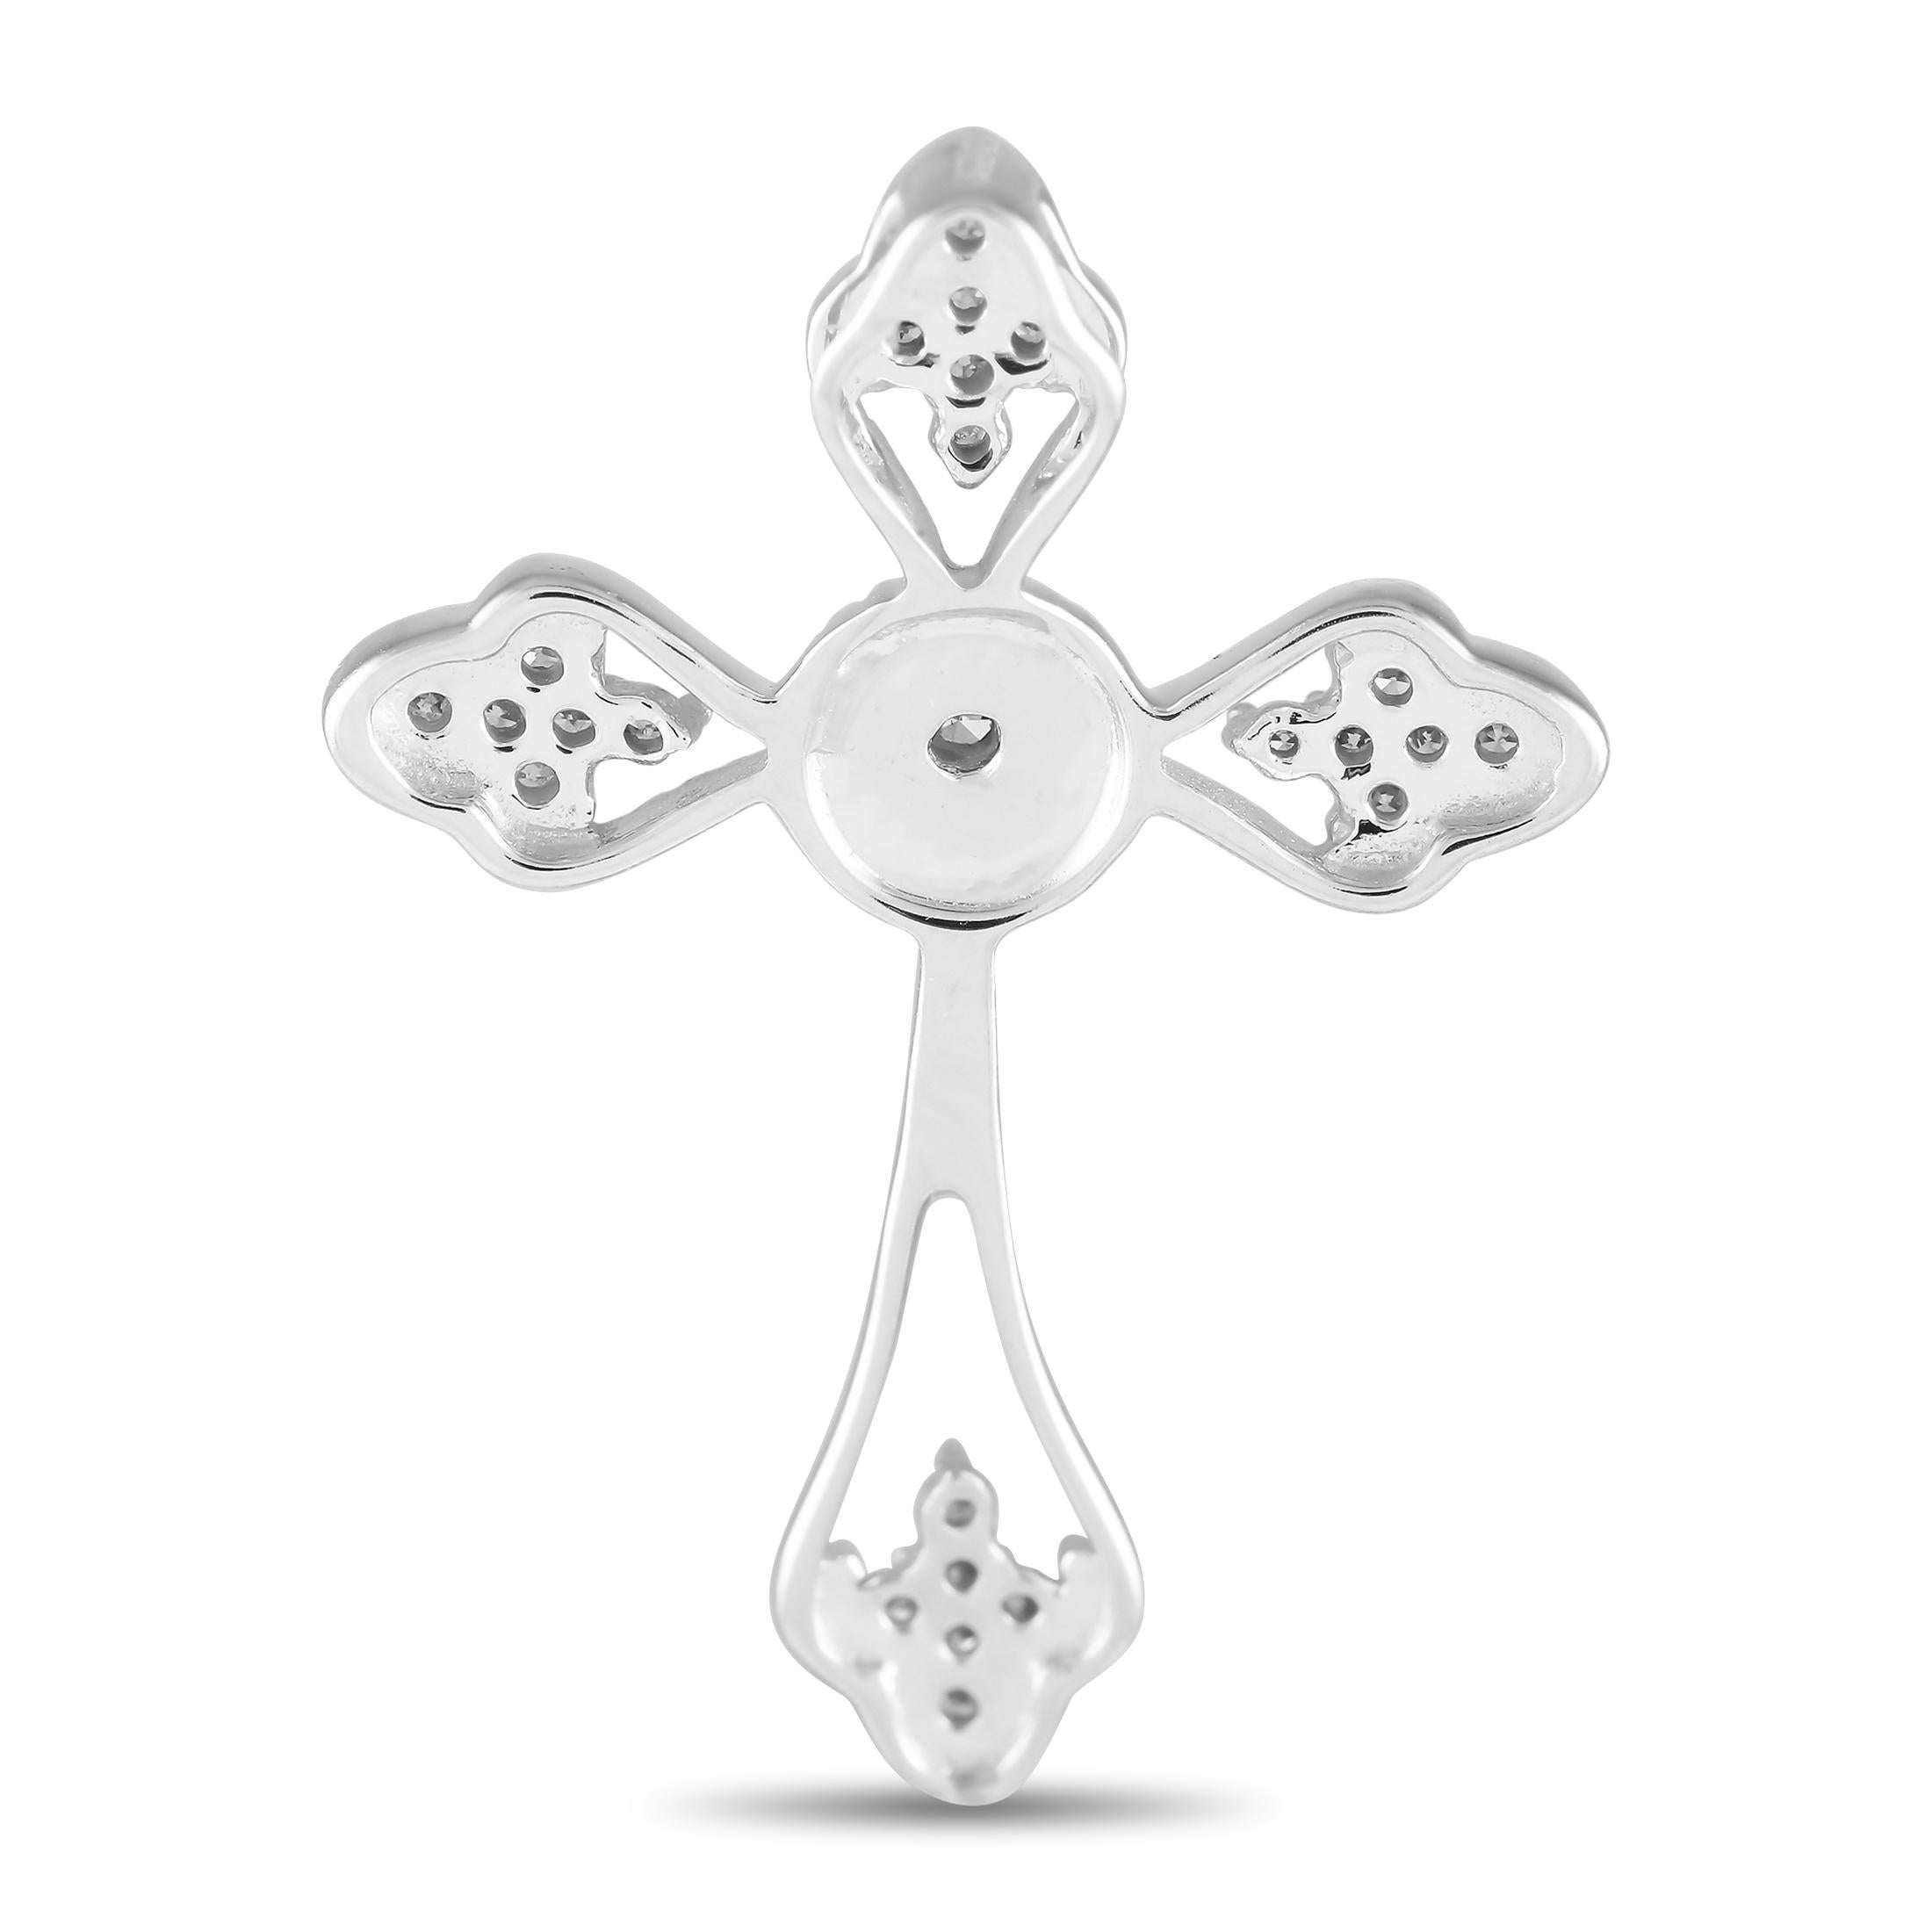 An affirmation of your faith, this diamond cross pendant makes a beautiful reminder of the divine presence and promise. It features a Latin cross silhouette with milgrain outline and diamond embellishment.This brand new 14K White Gold 0.10 ct